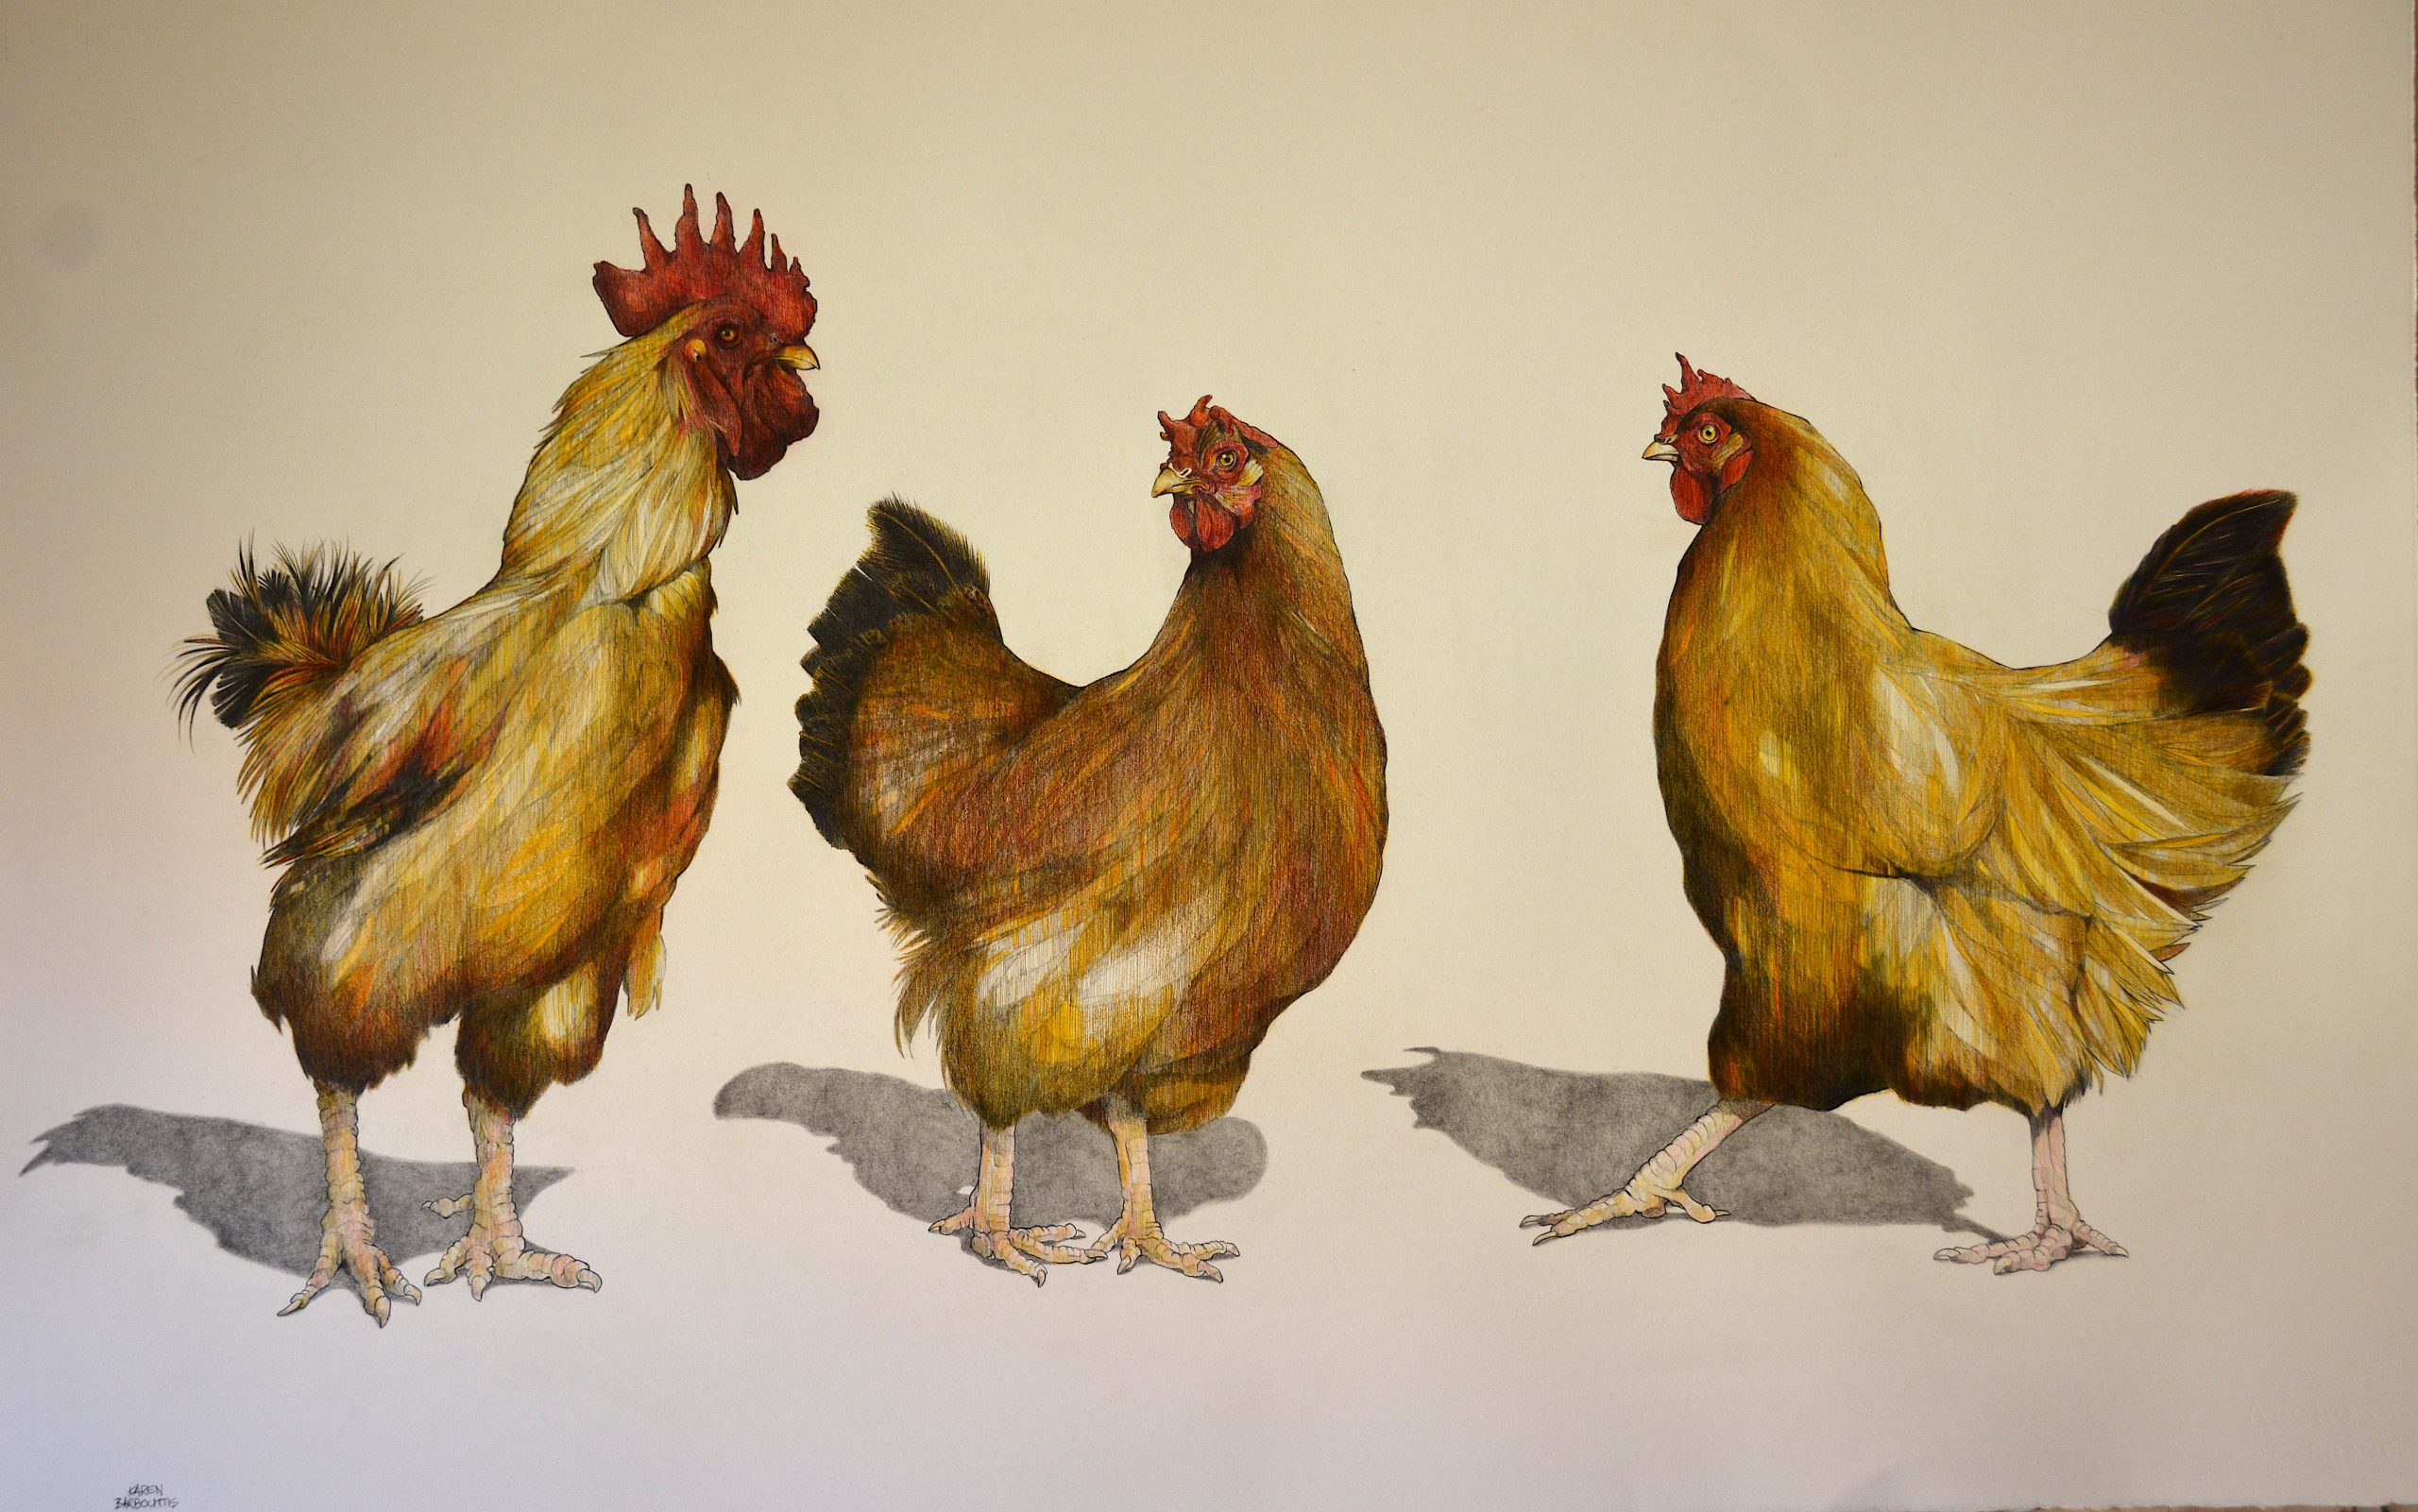 Mykonos Island Chickens and Rooster. Pencil on Paper. 80x110cm